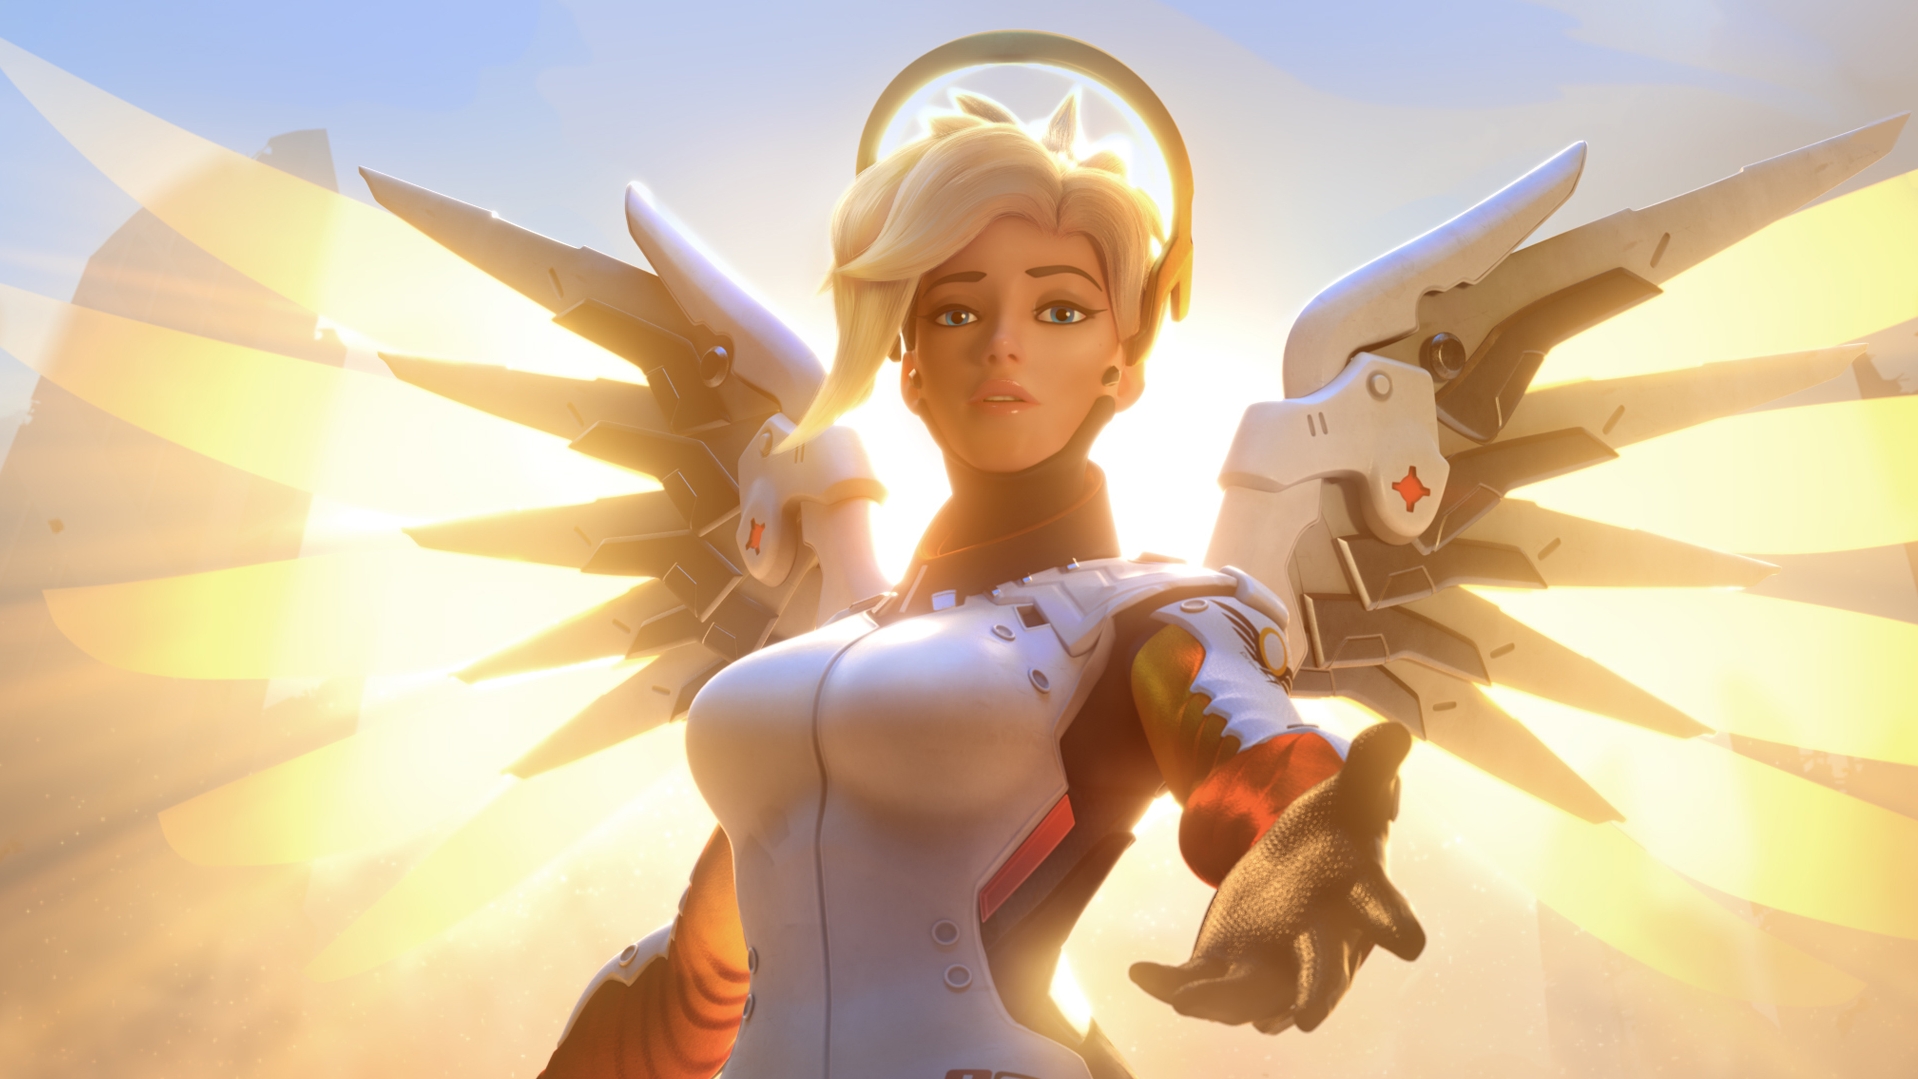 Overwatch player builds motorized glove to become the ultimate Mercy main  (Updated) | PC Gamer